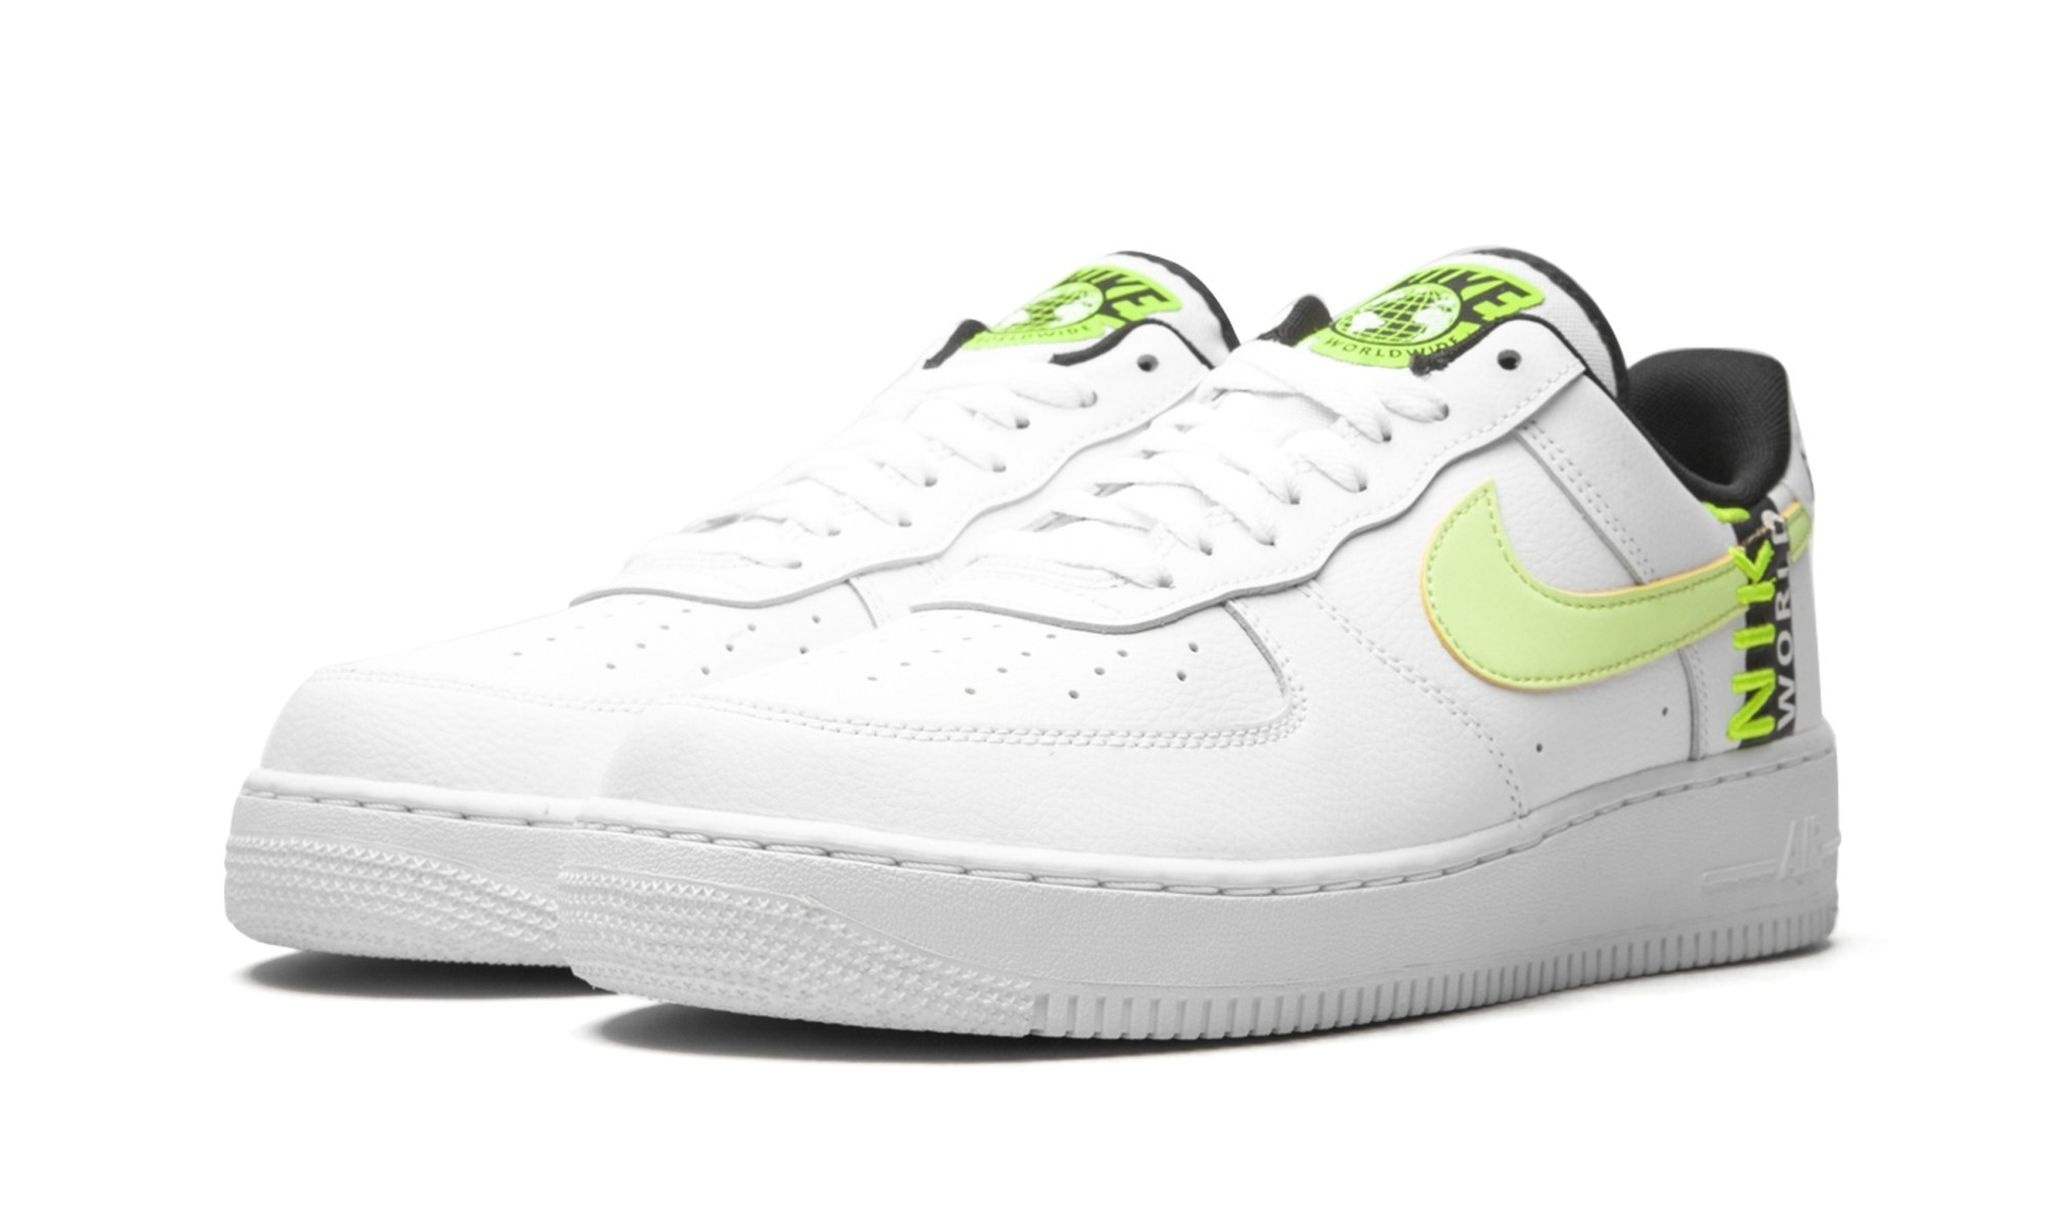 Air Force 1 Low "Worldwide White Volt" - 2